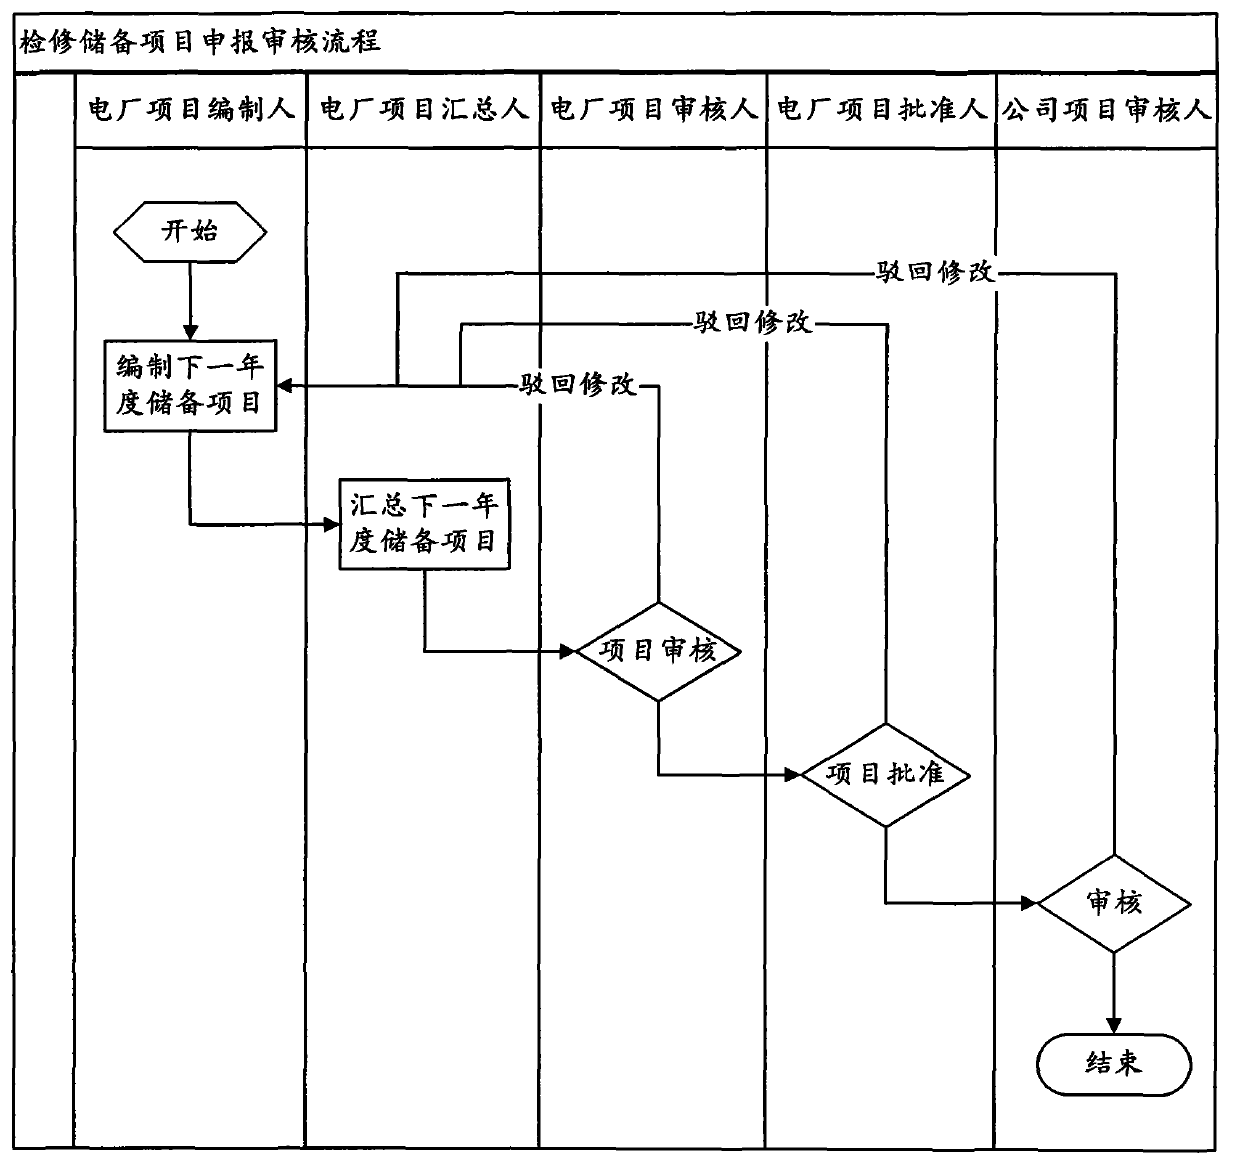 Method for planning inspection project in hydroelectric production management system